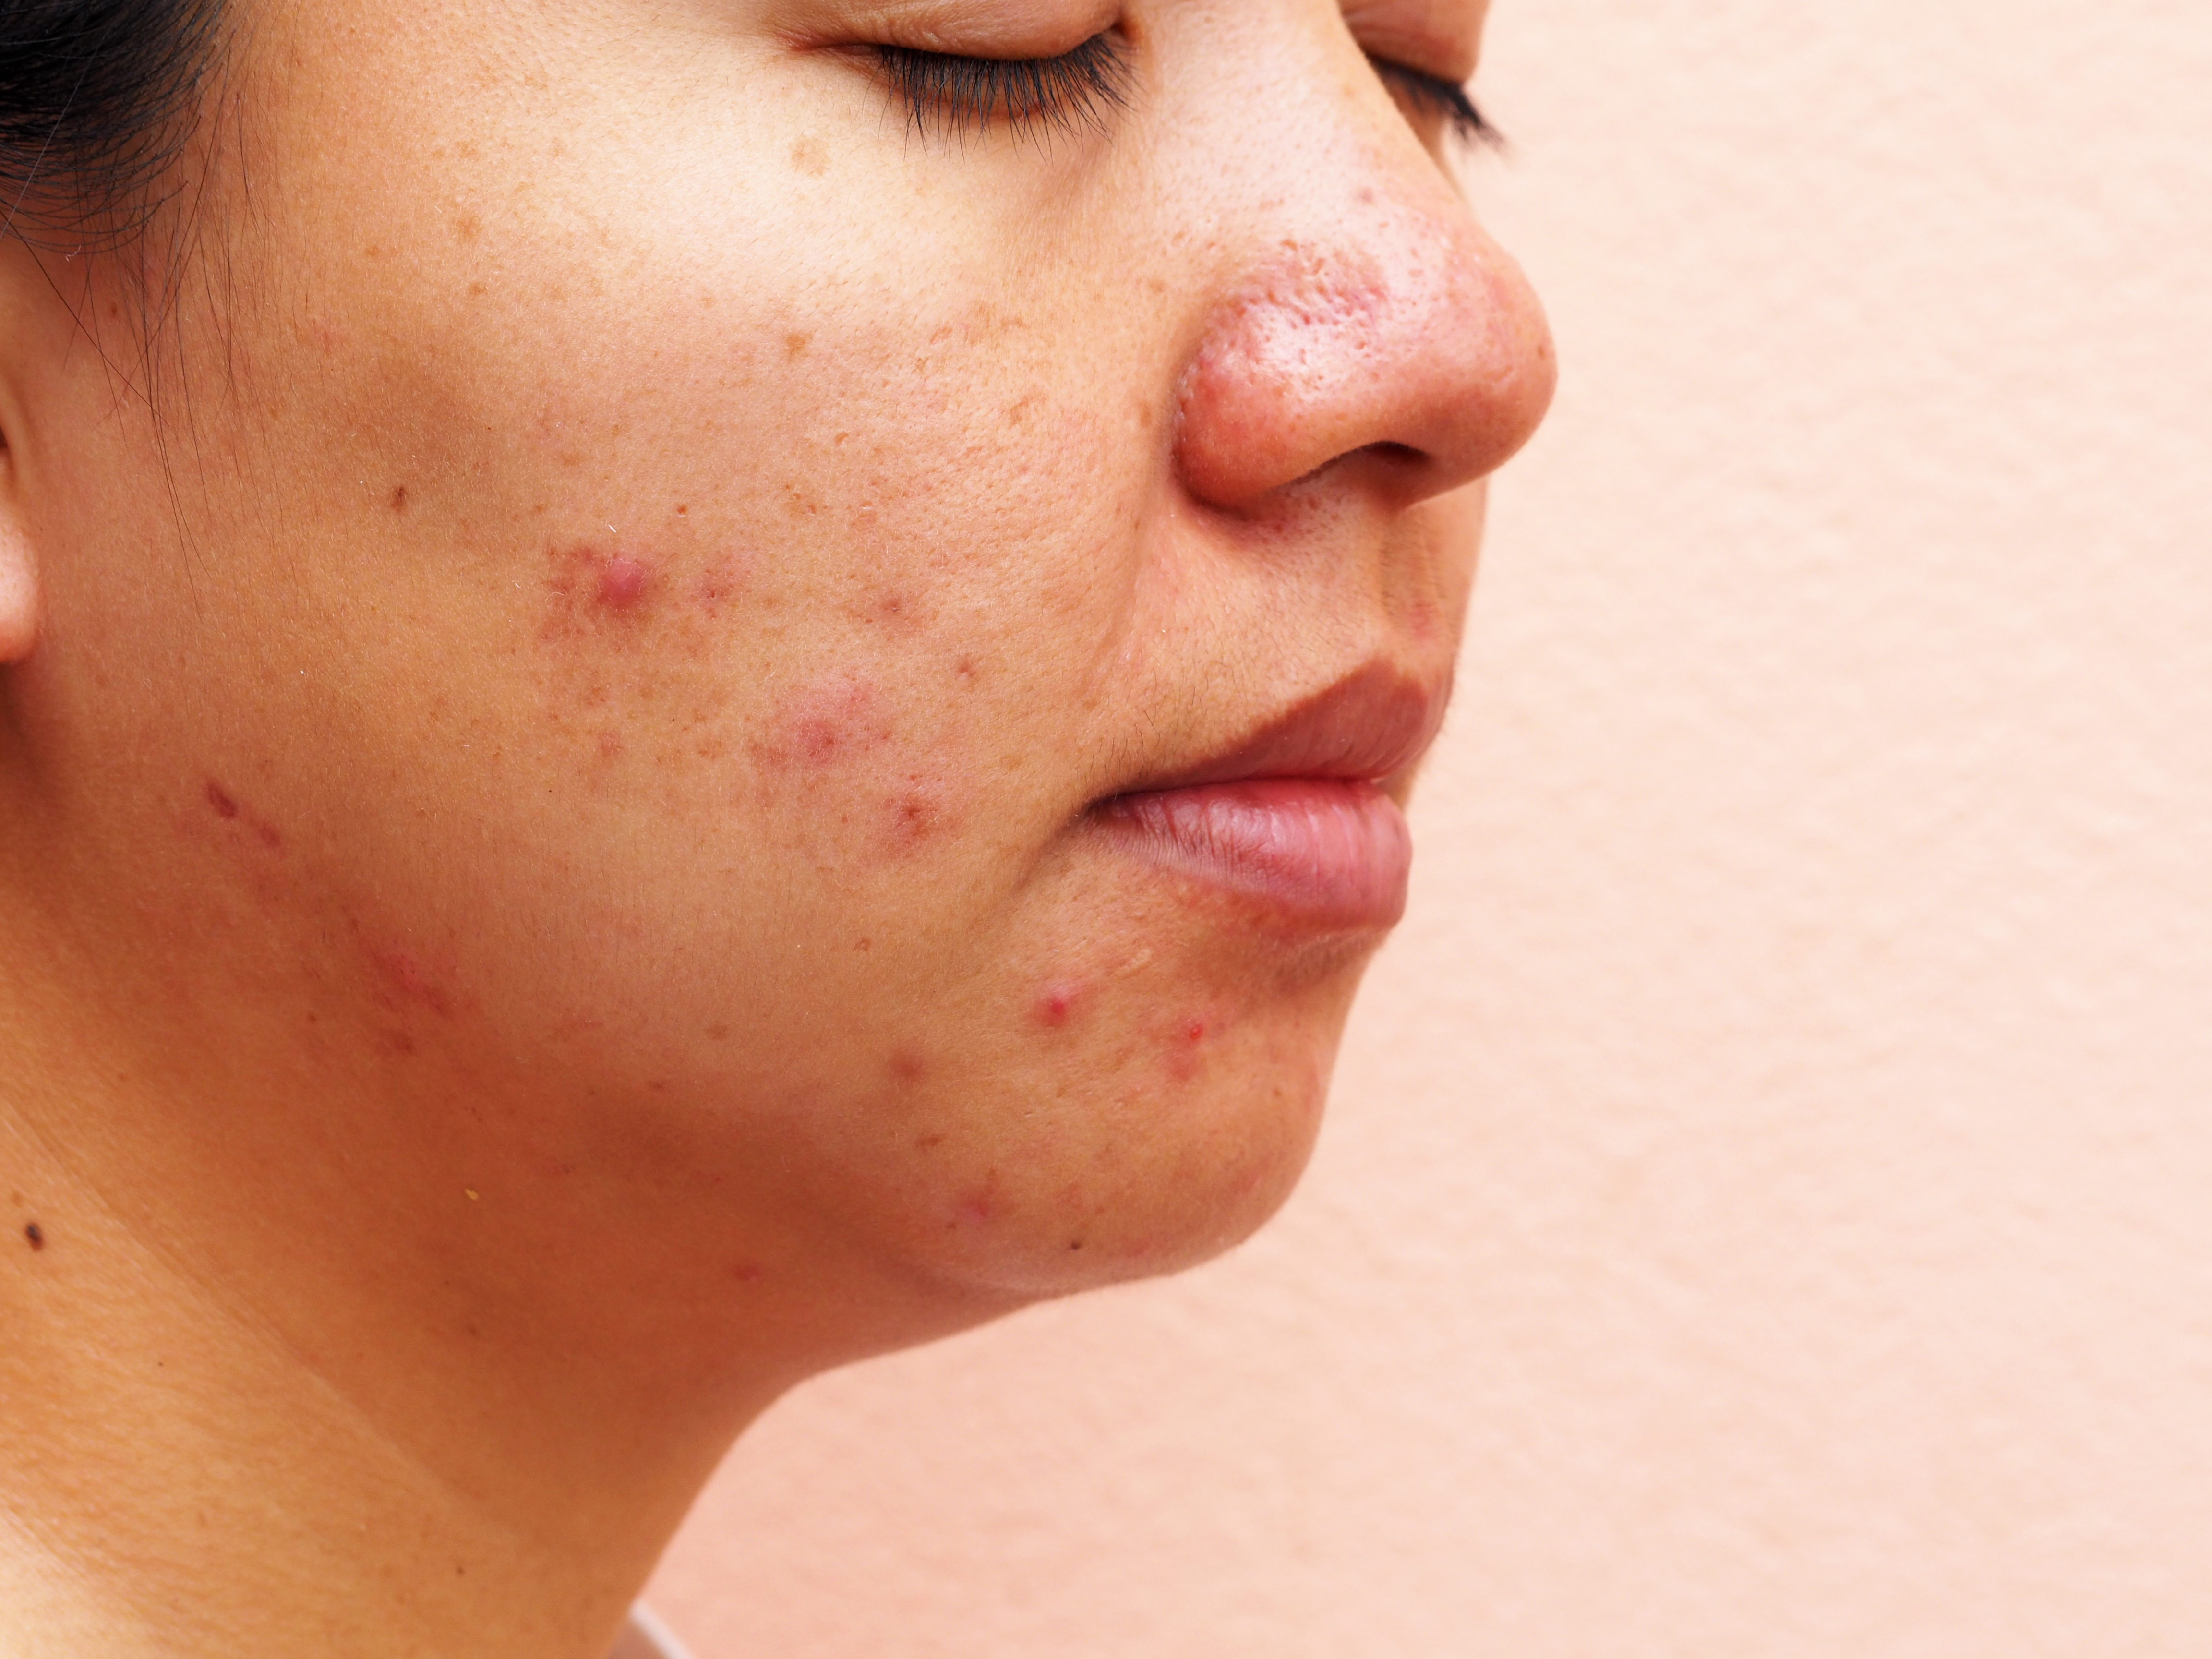 adult acne, healthy skin after 40 